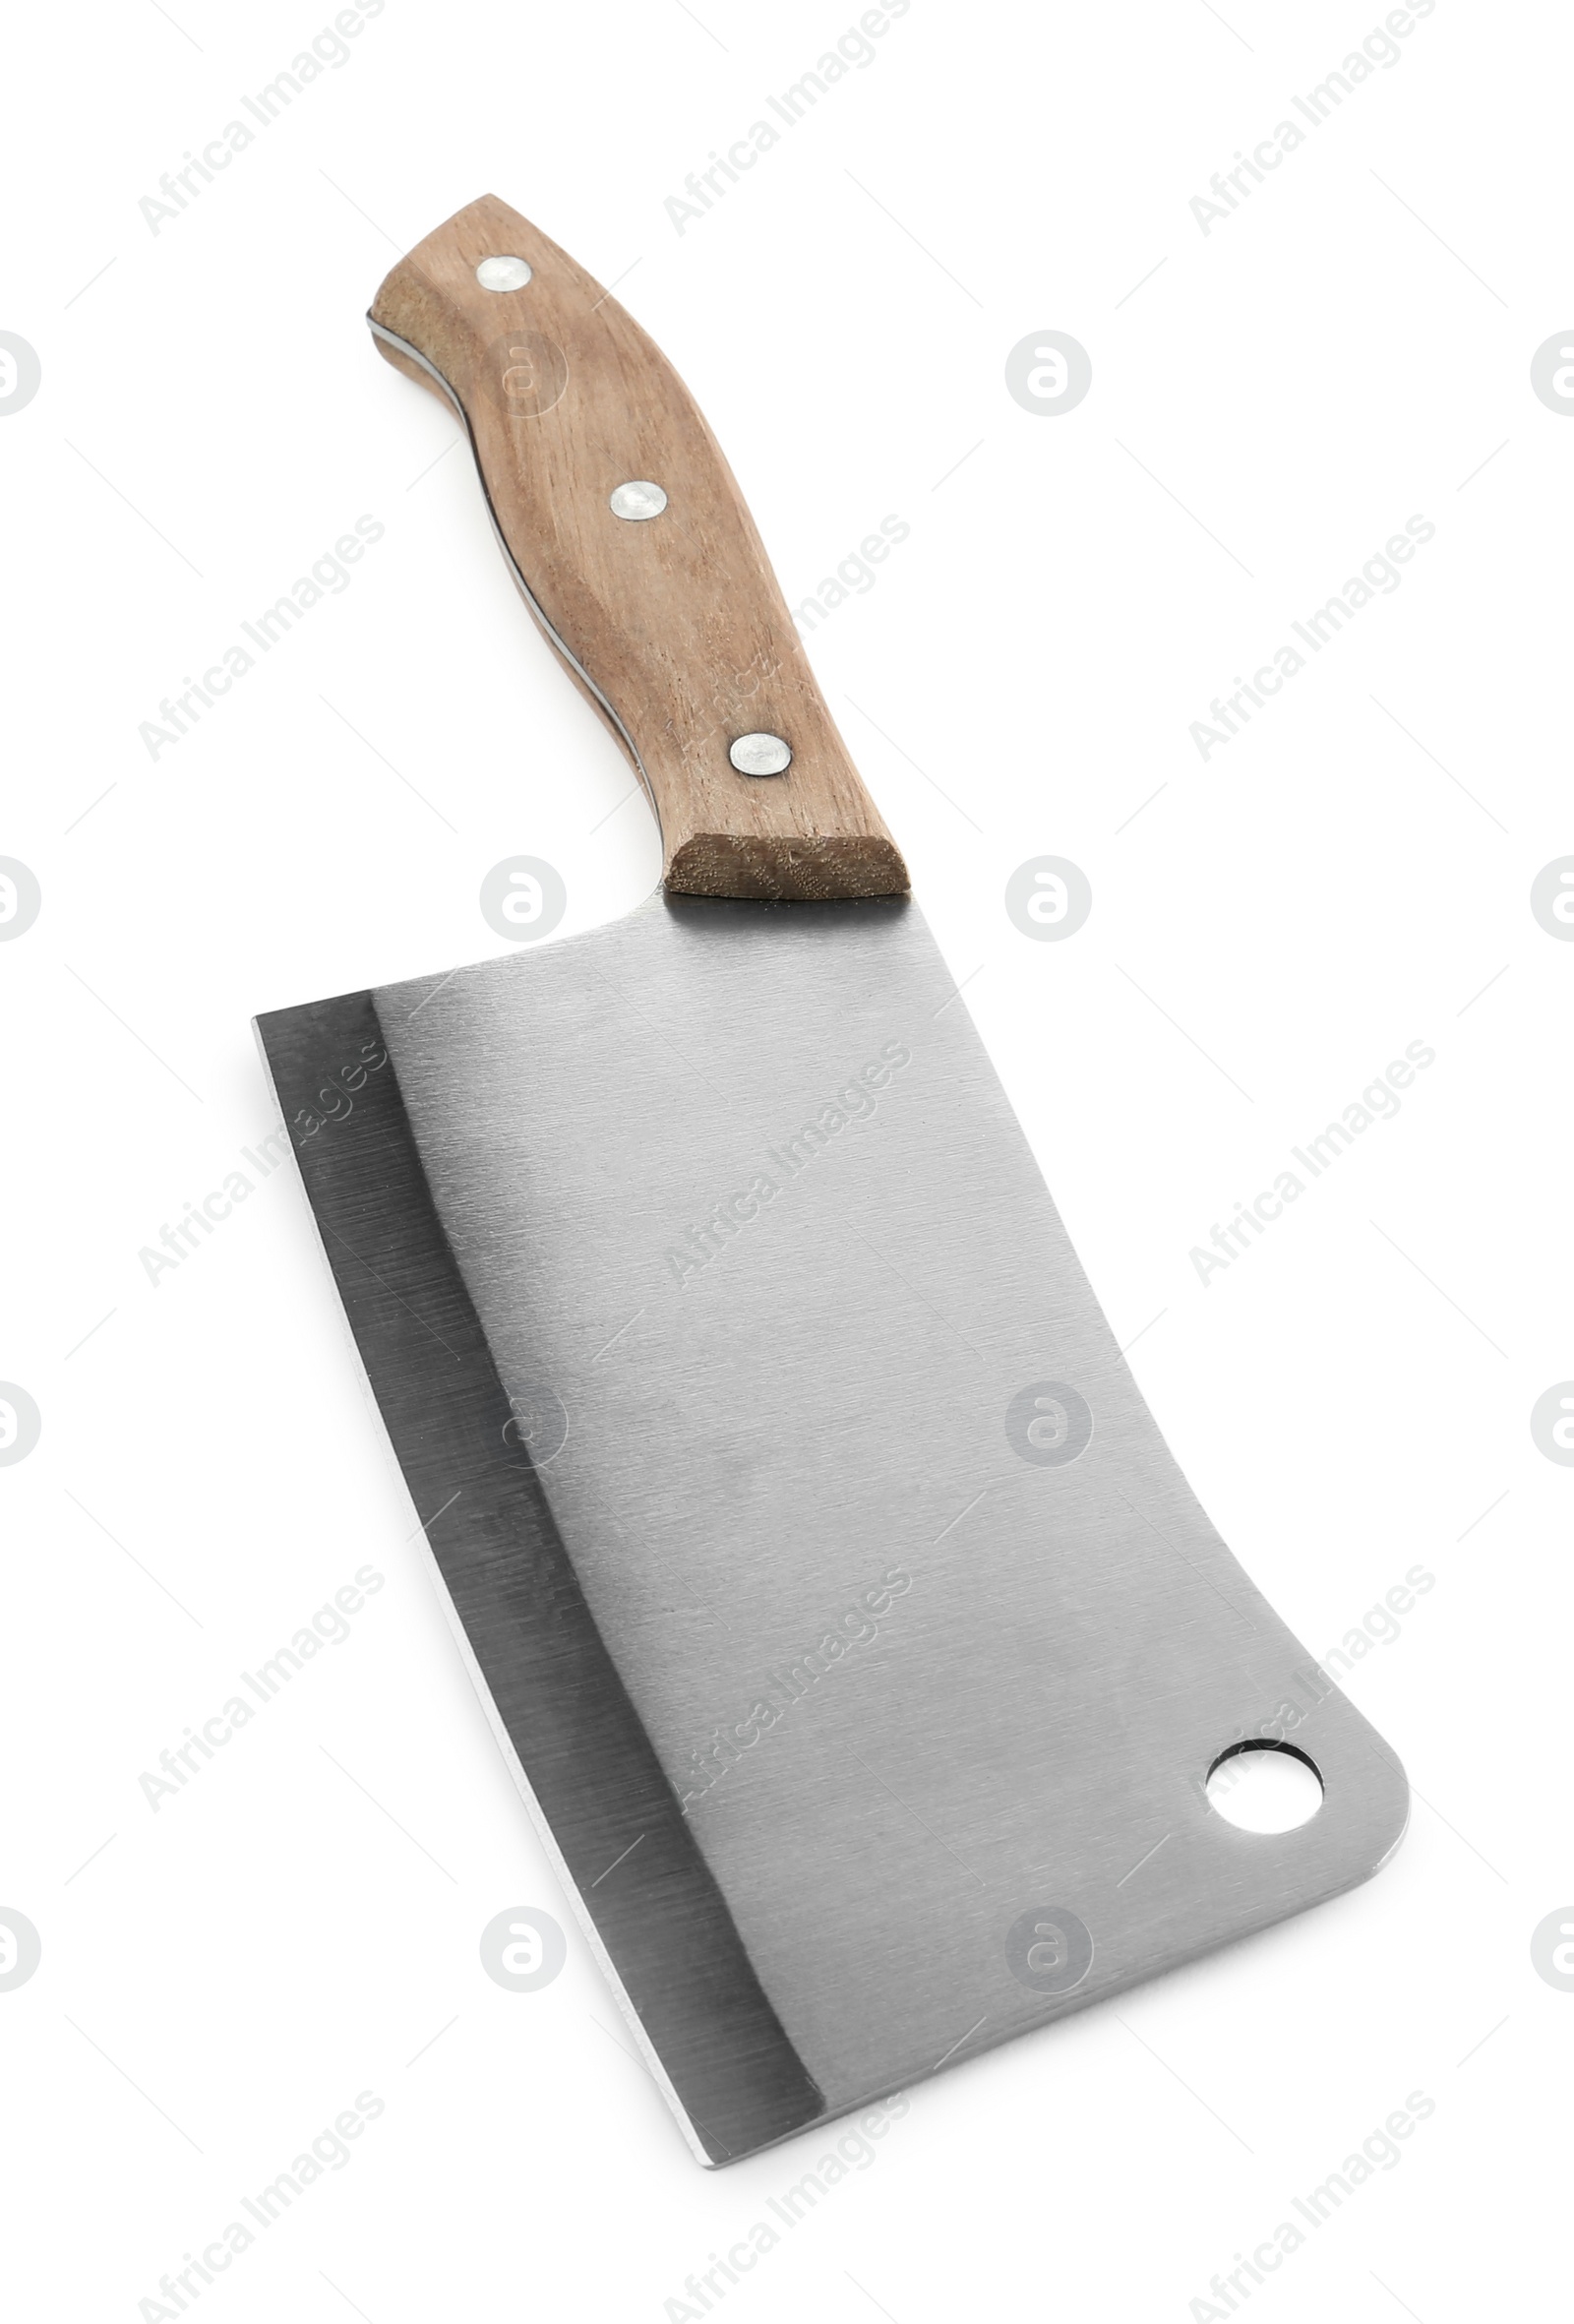 Photo of Large sharp cleaver knife with wooden handle isolated on white